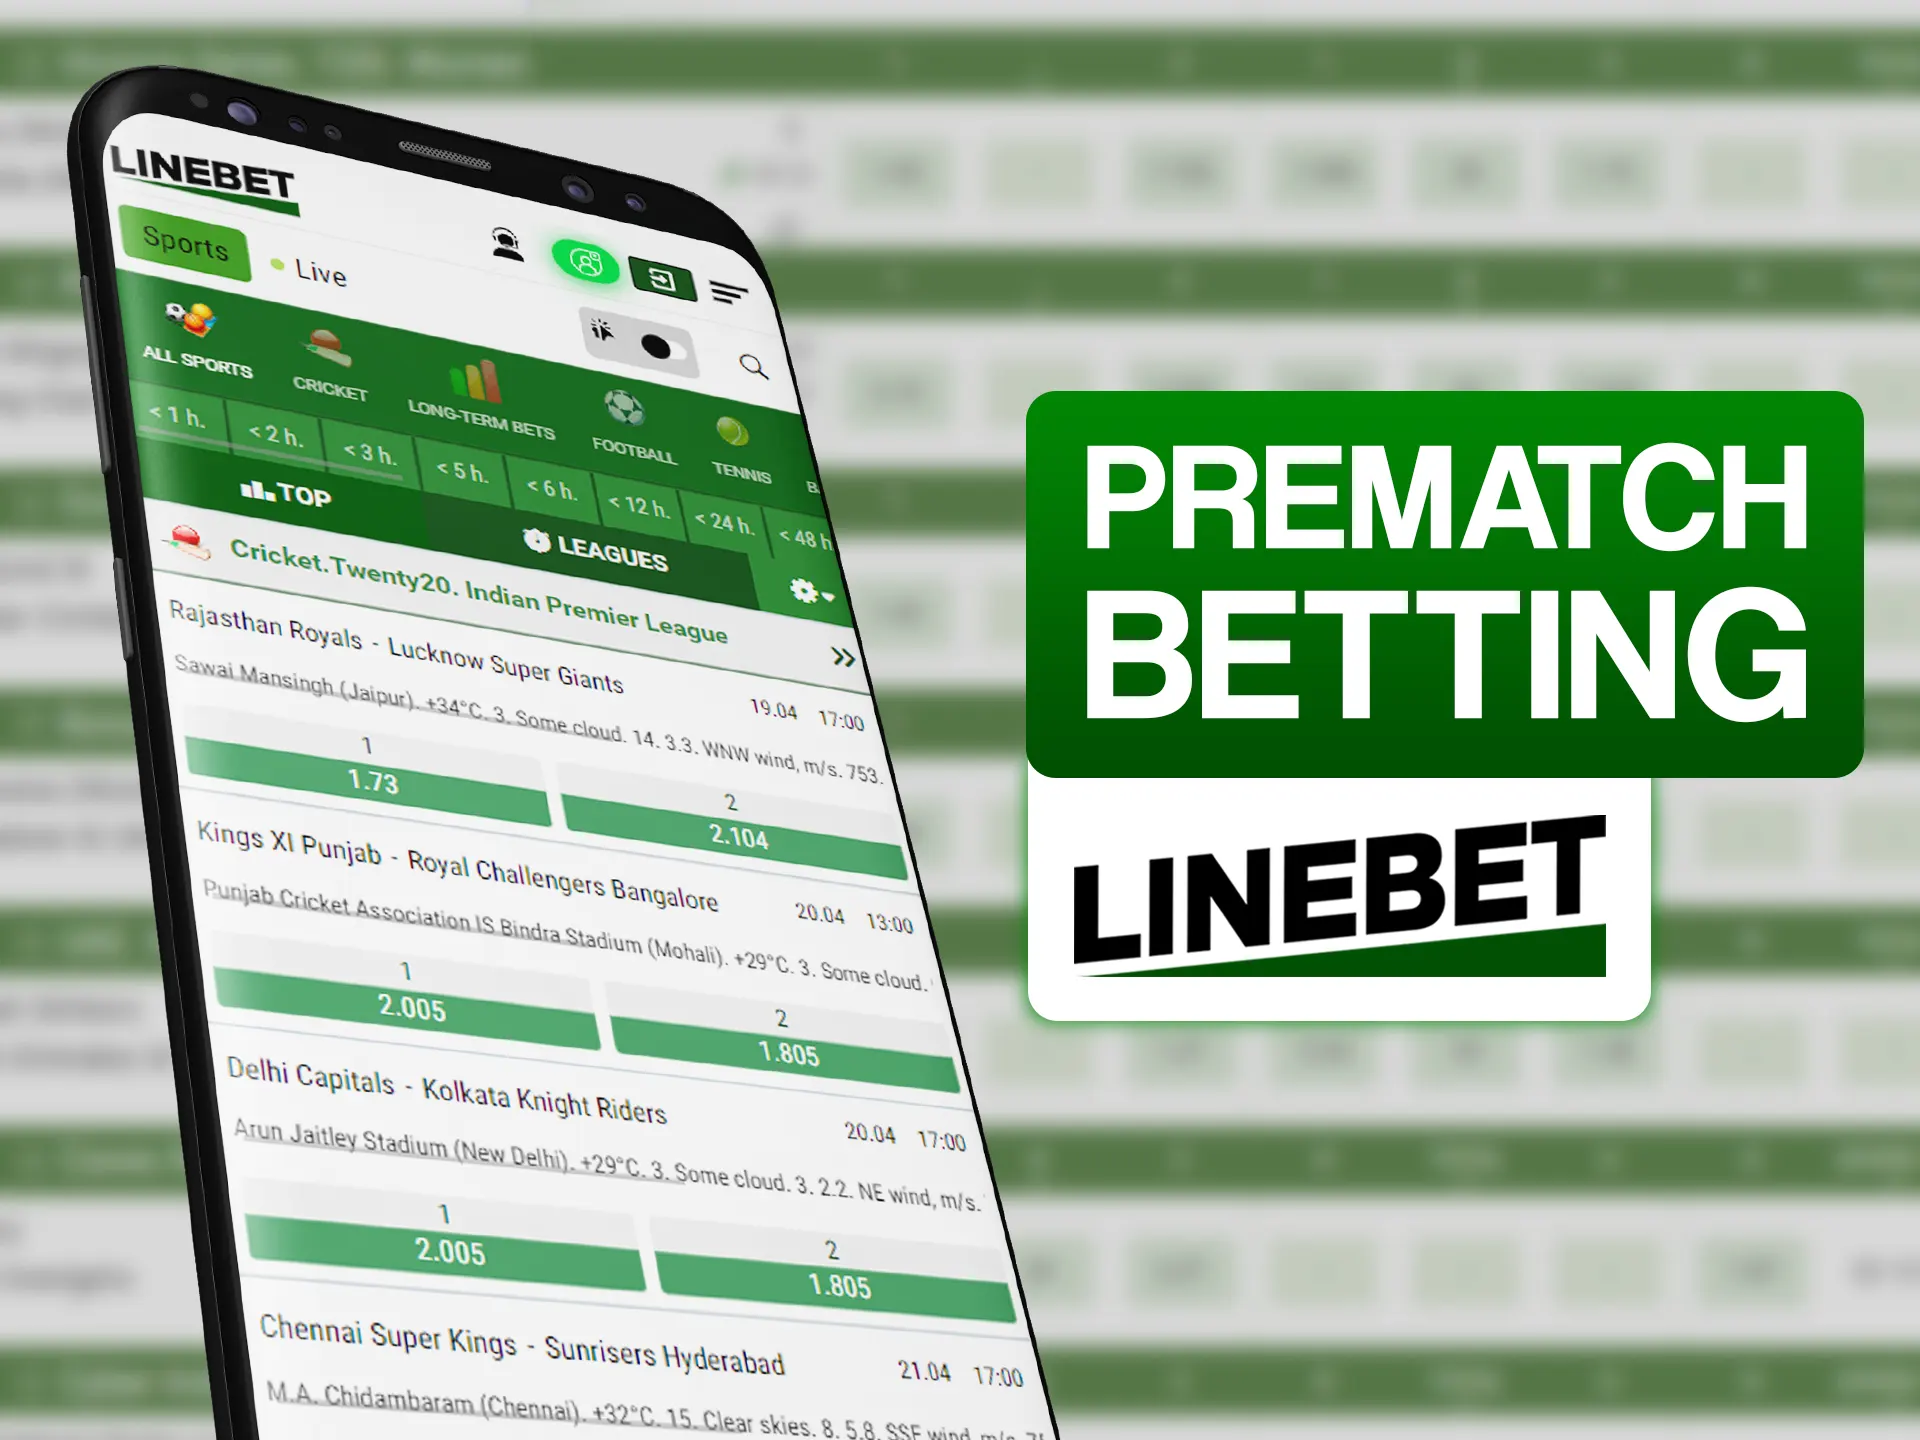 Make bets on future matches at Linebet.